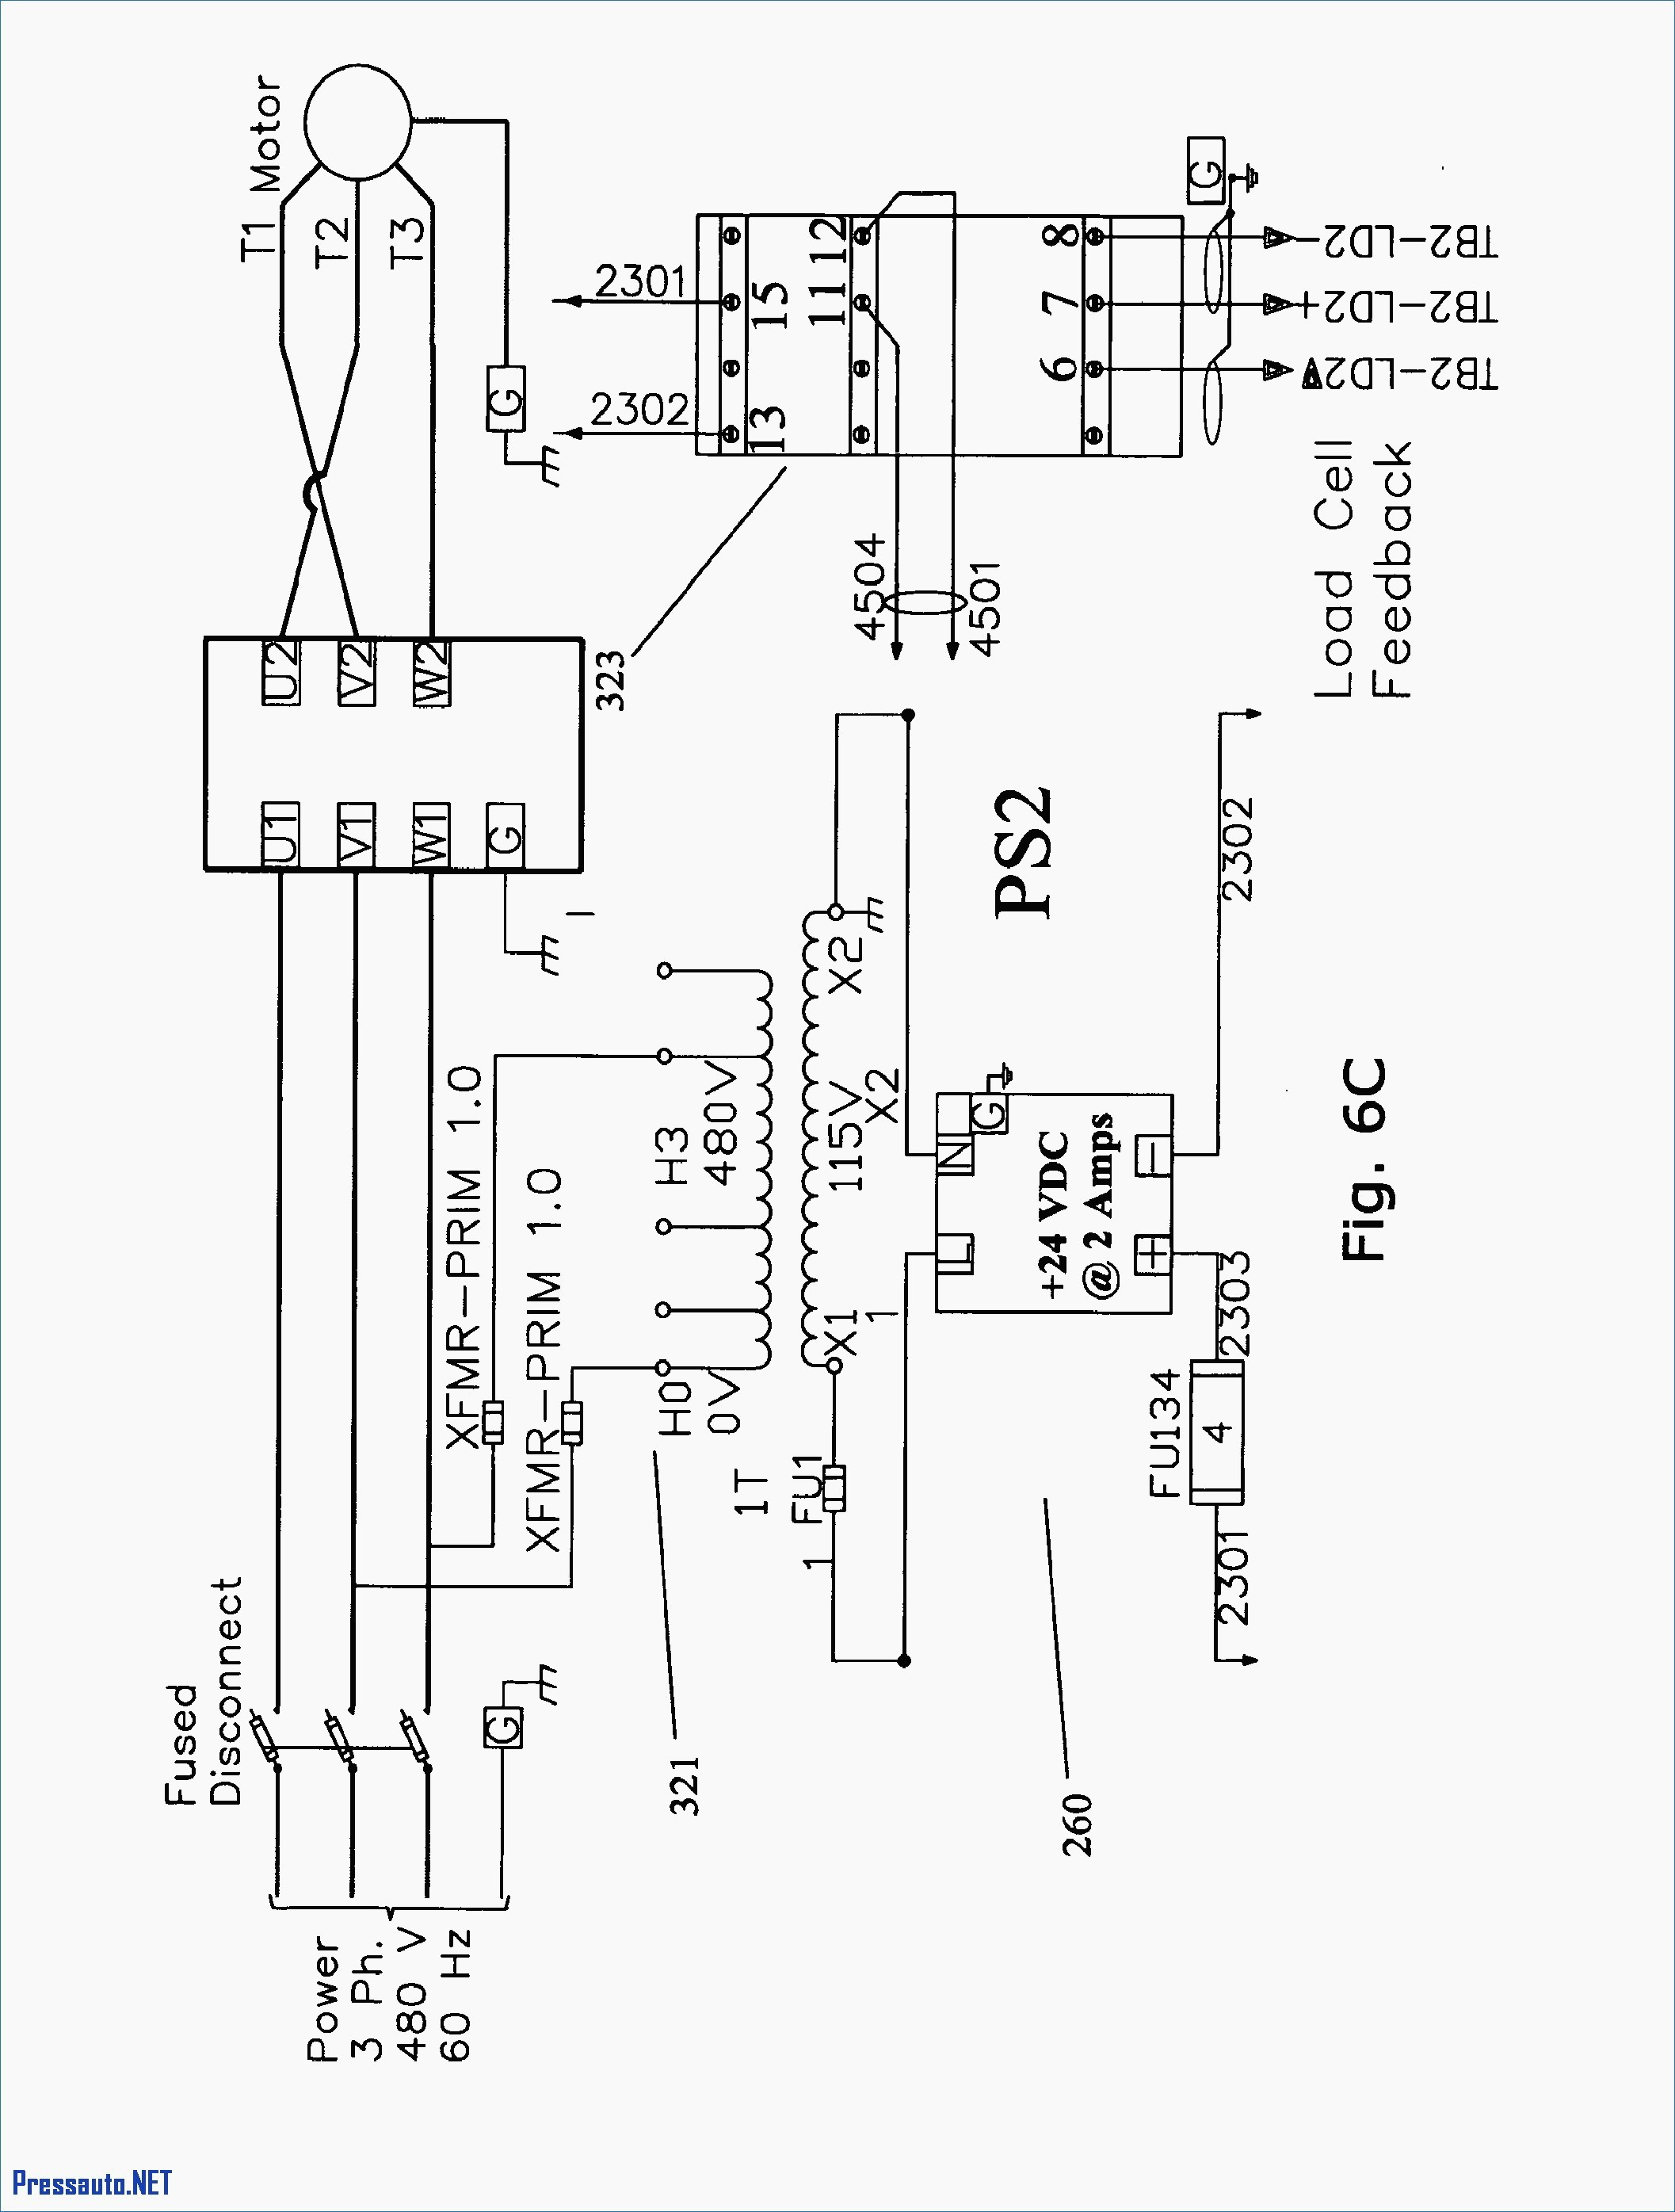 Century Battery Charger Wiring Diagram | Manual E-Books - Century Battery Charger Wiring Diagram